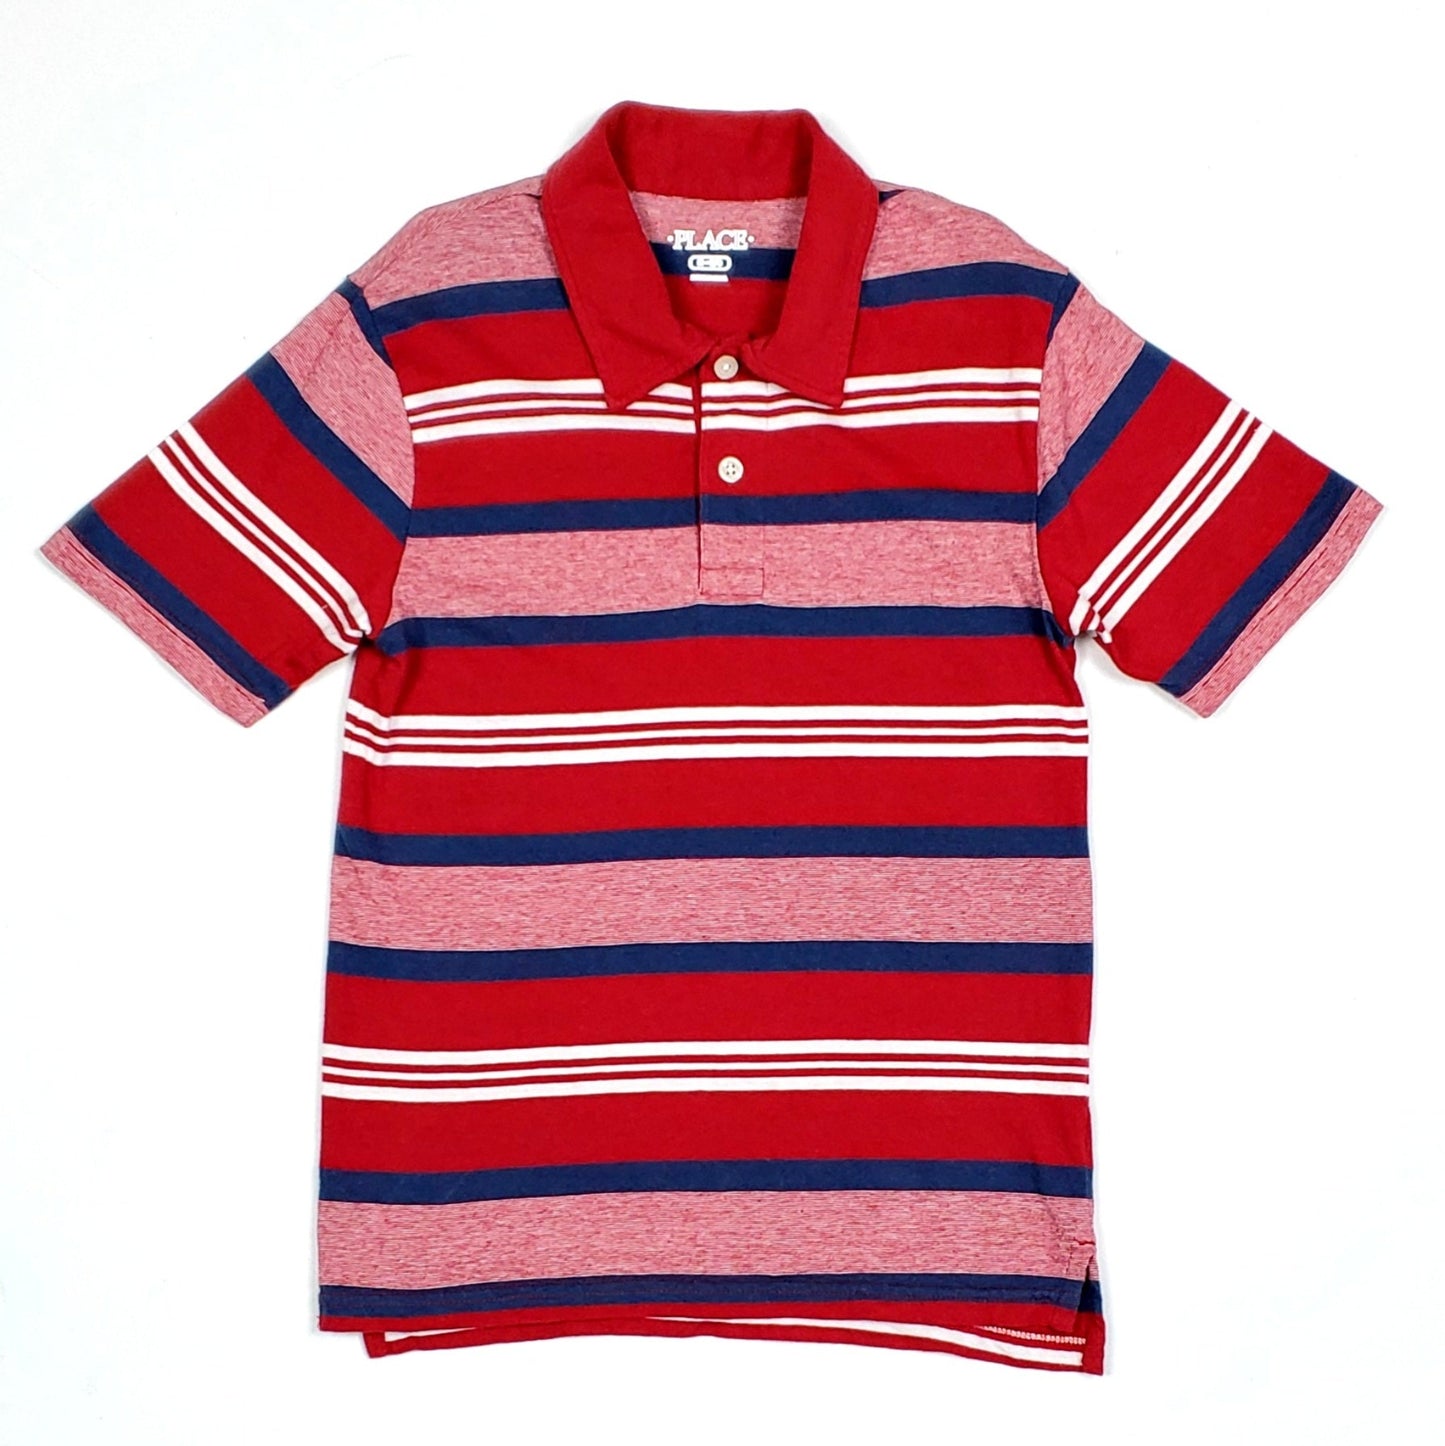 Childrens Place Boys Red Striped Polo Shirt Medium Used View 1